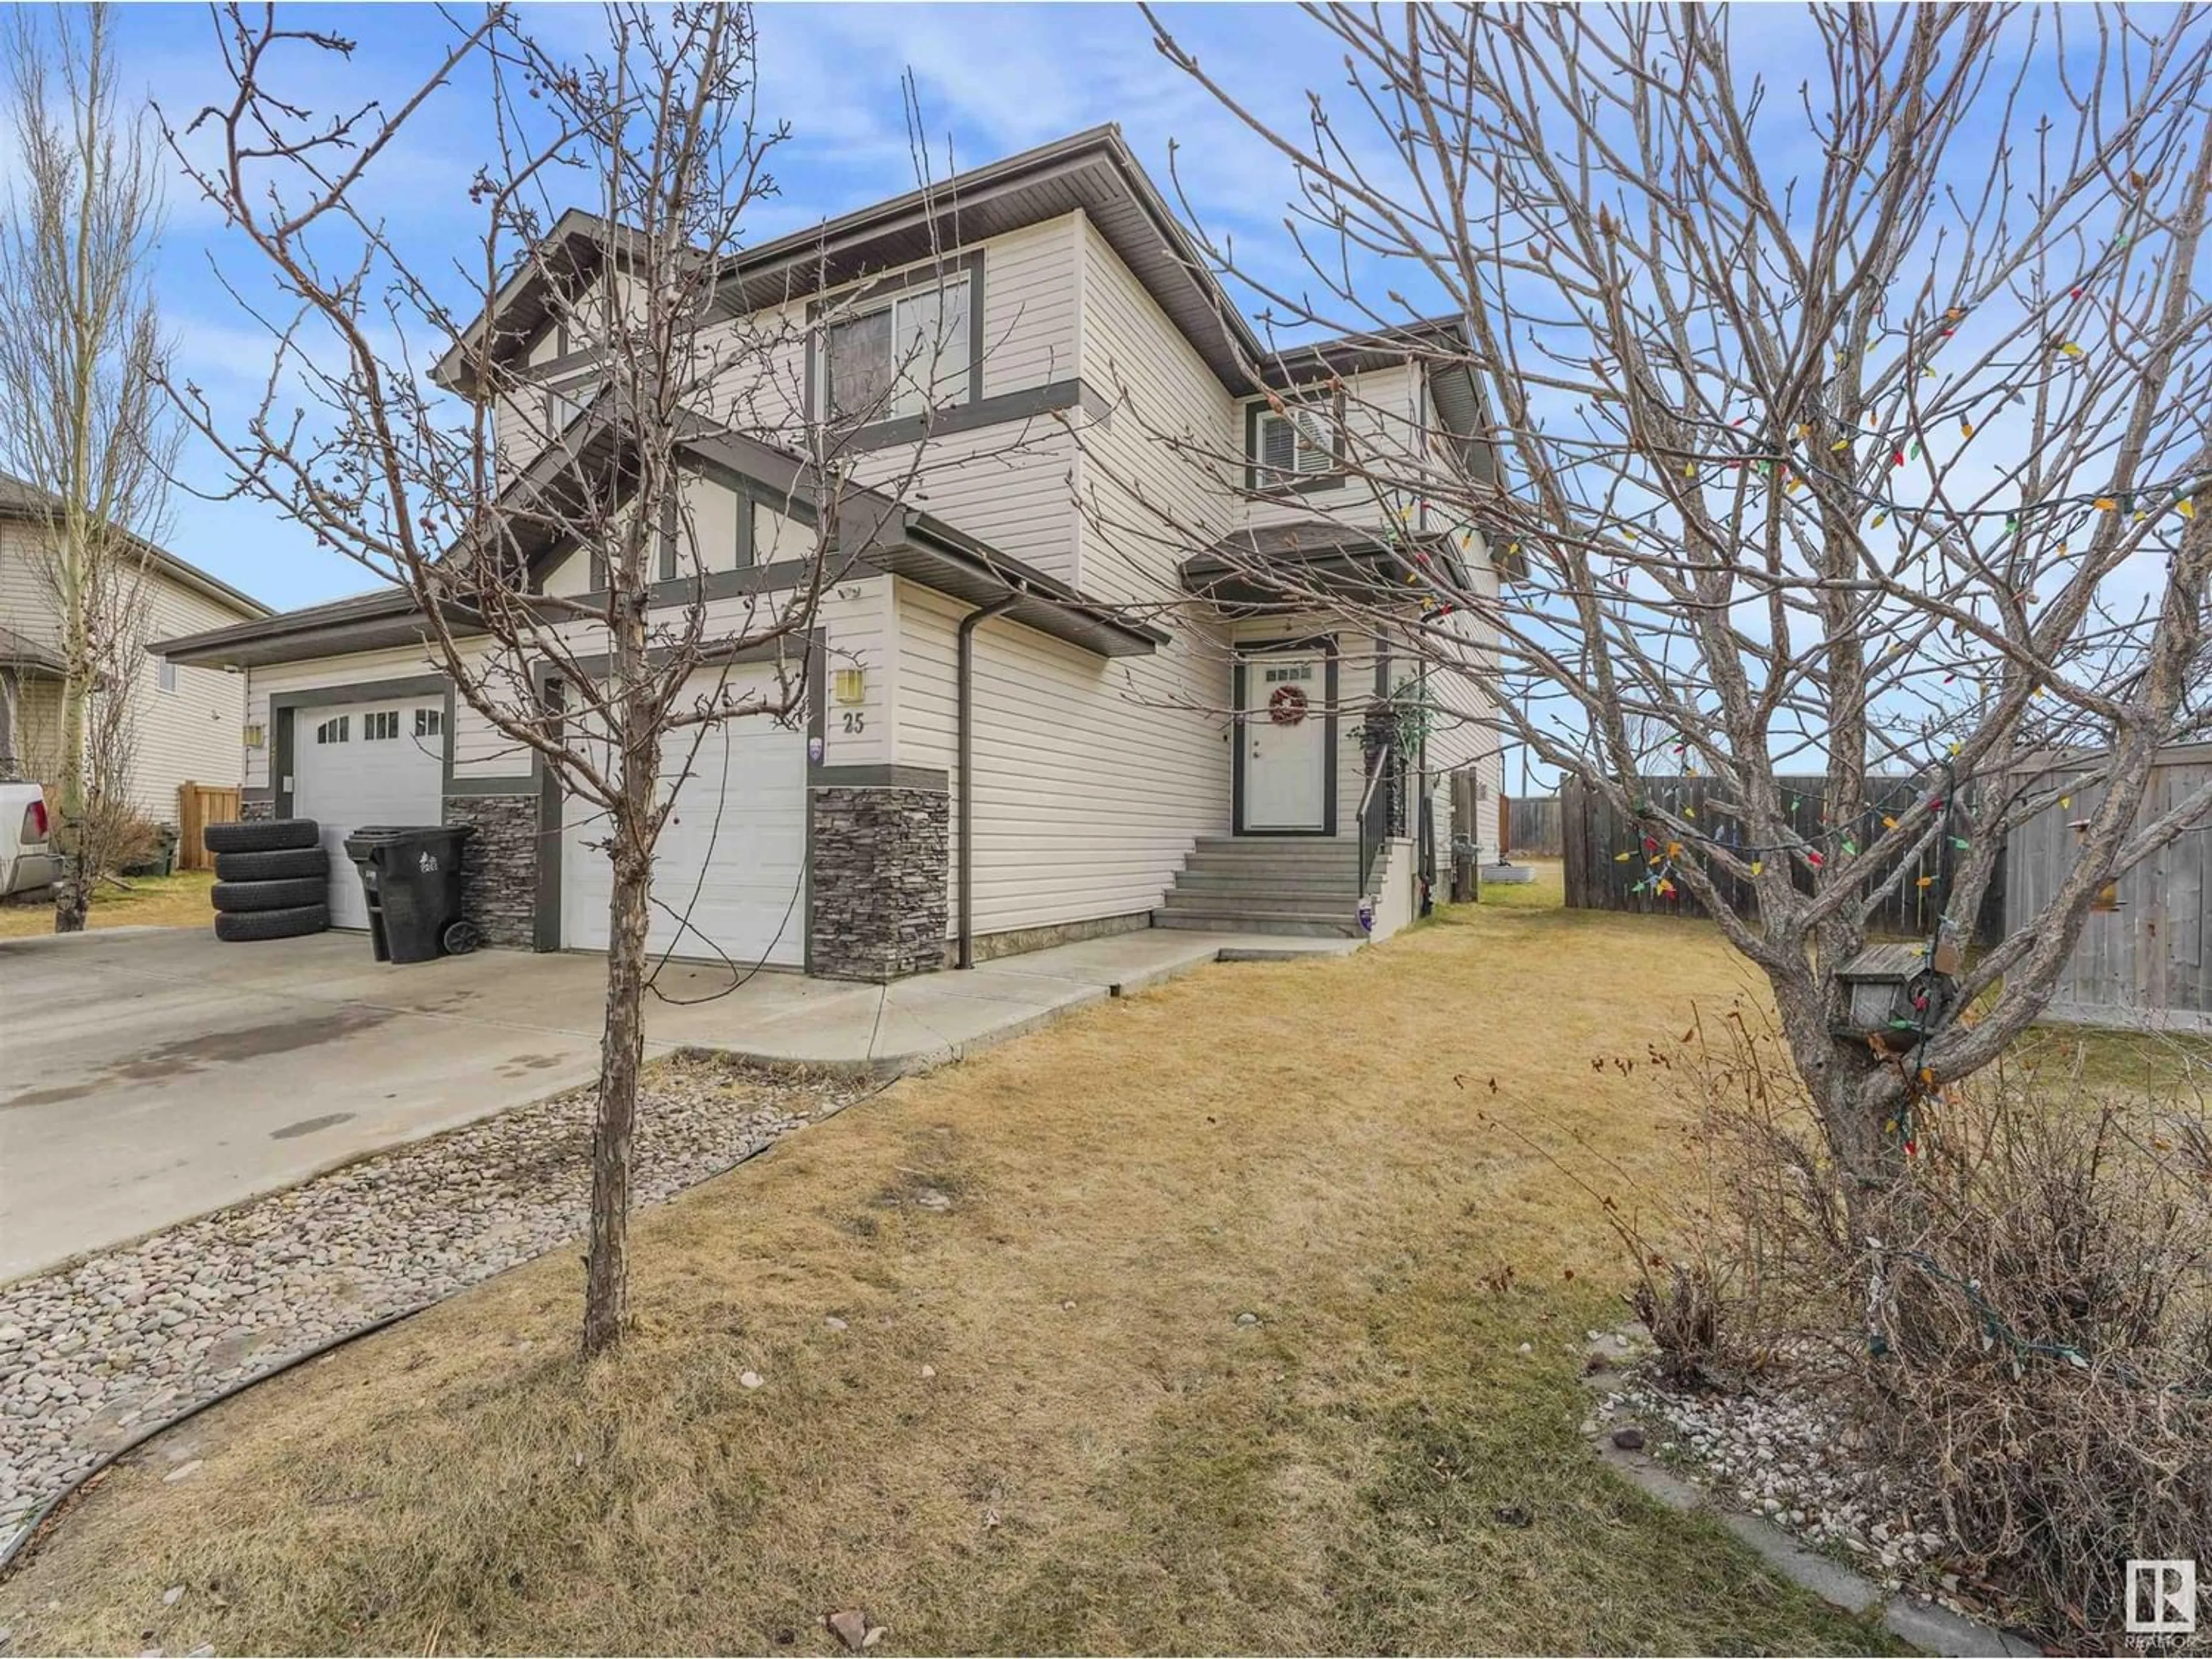 Frontside or backside of a home for 25 HARTWICK CO, Spruce Grove Alberta T7X0K2